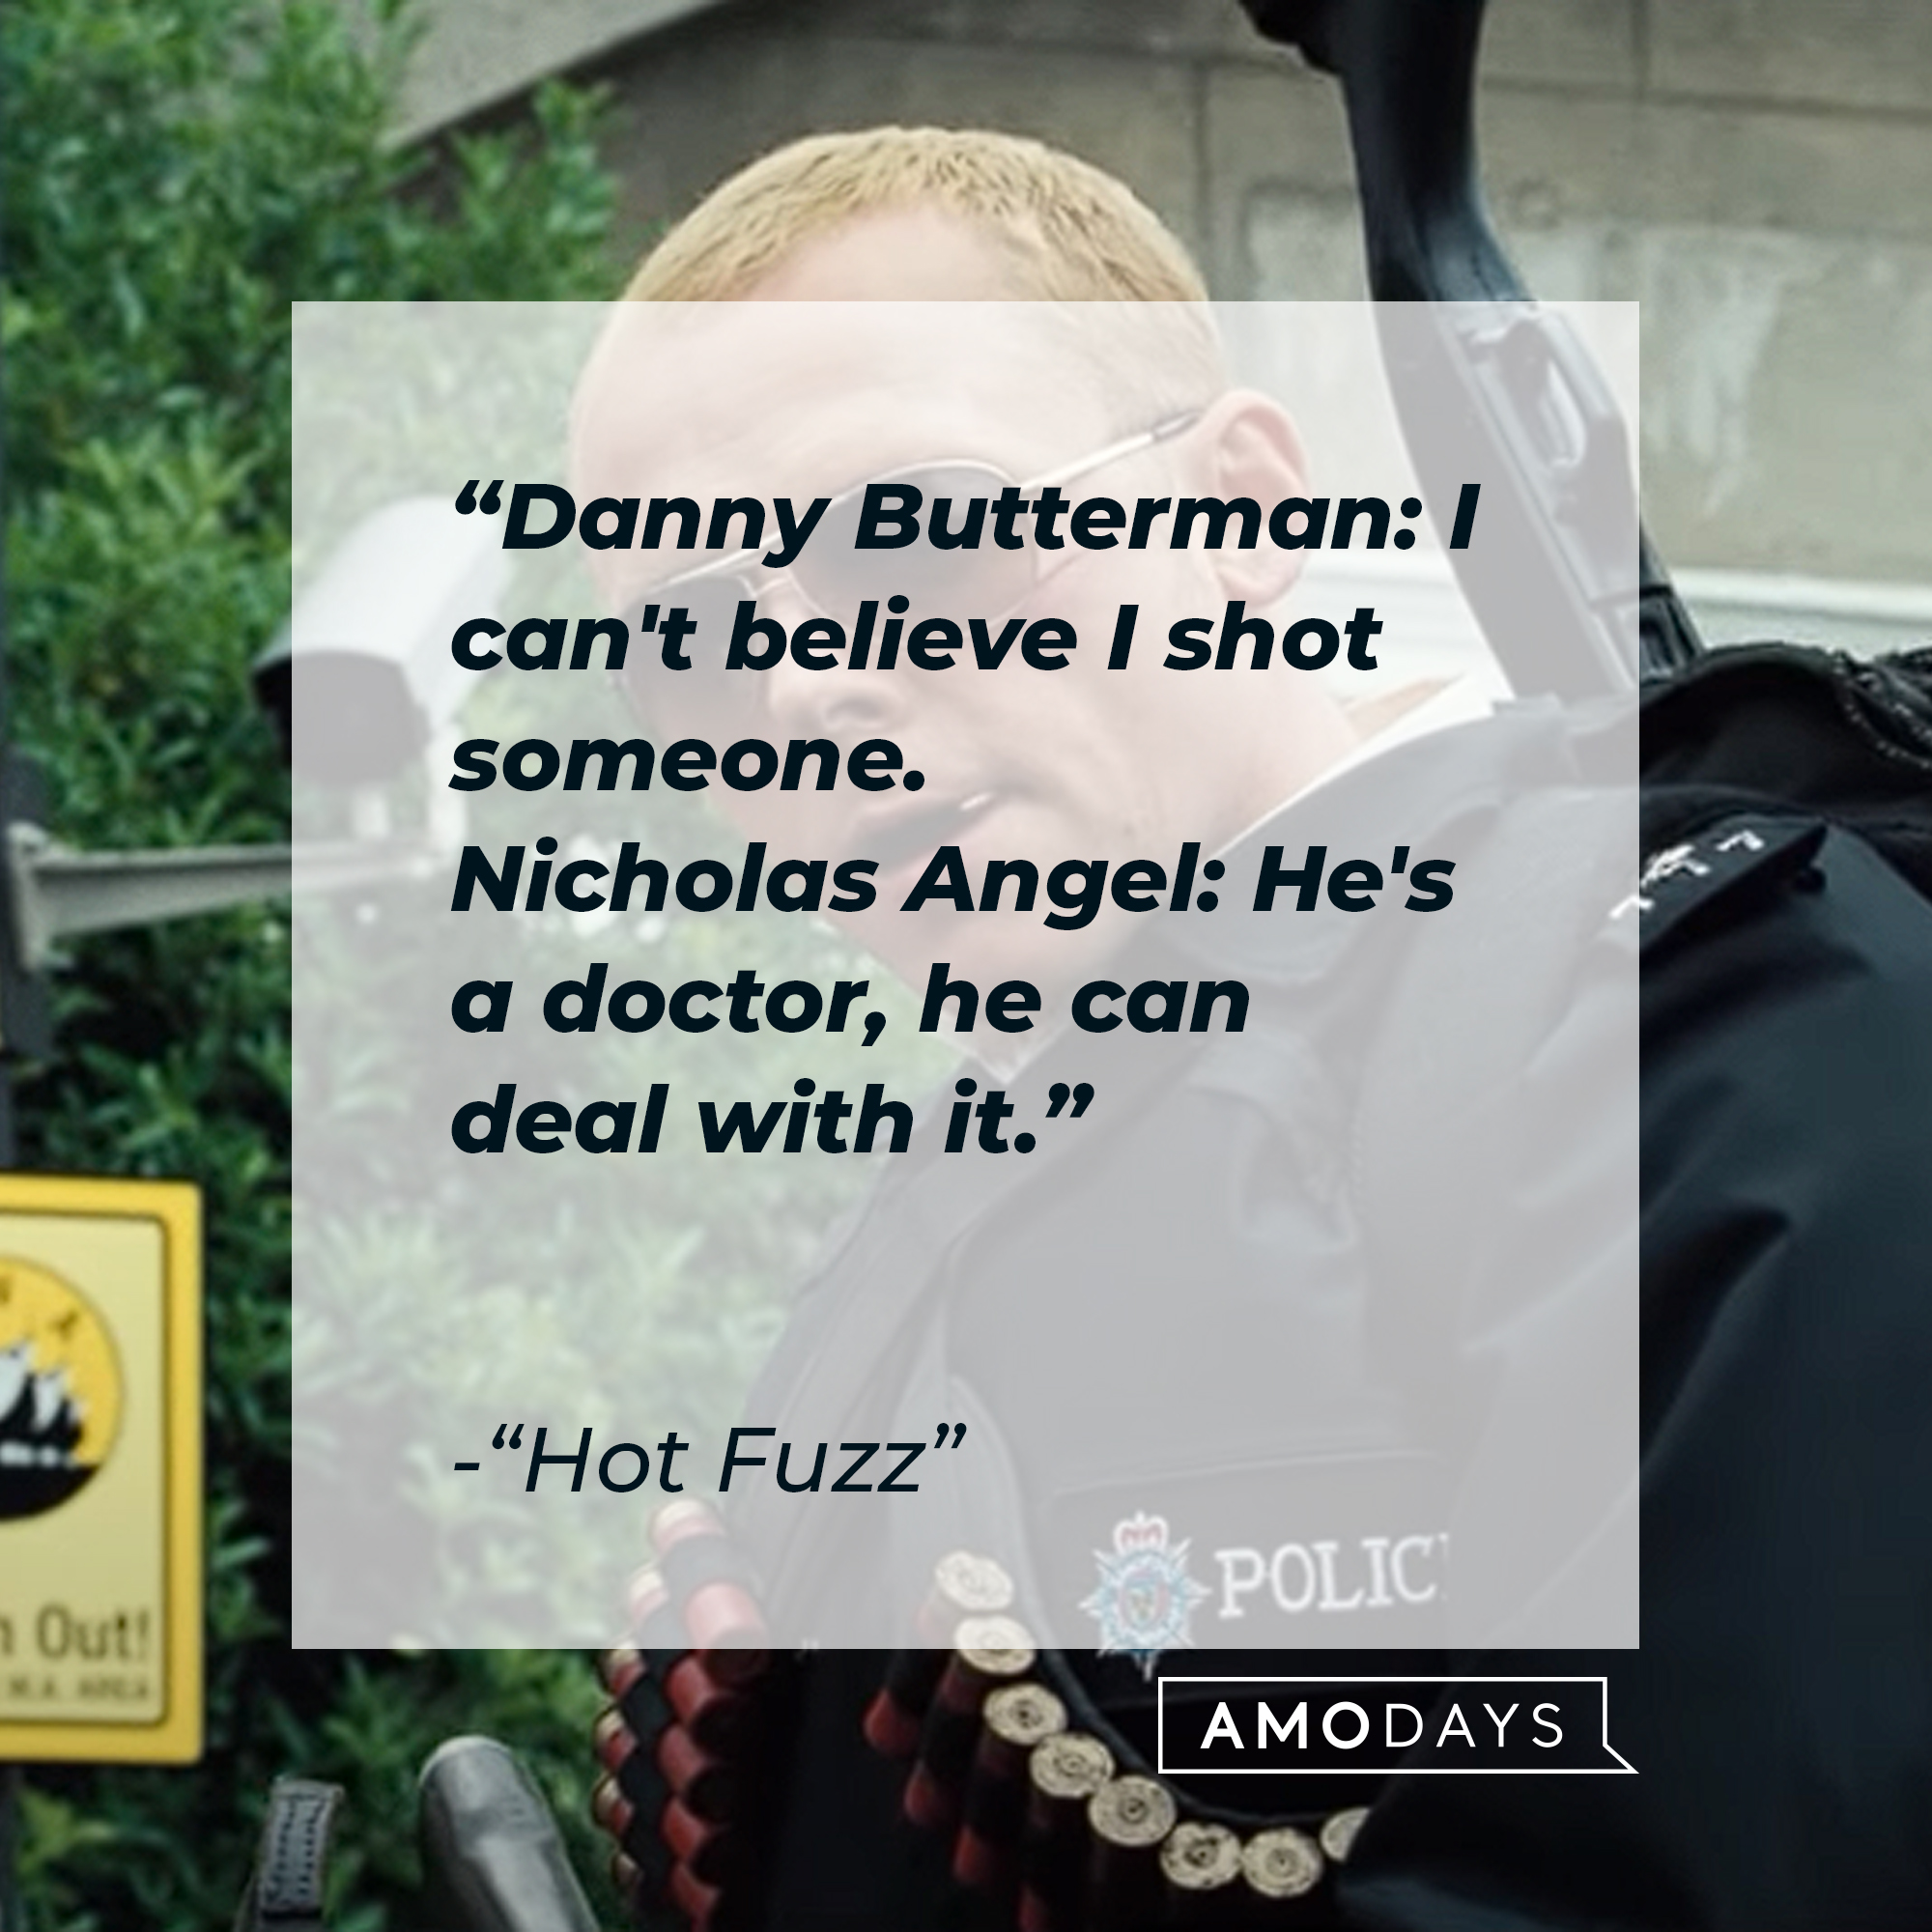 Nicholas Angel and Danny Butterman's quotes in "Hot Fuzz:" “Danny Butterman: I can't believe I shot someone. Nicholas Angel: He's a doctor, he can deal with it.” | Source: Youtube.com/UniversalPictures